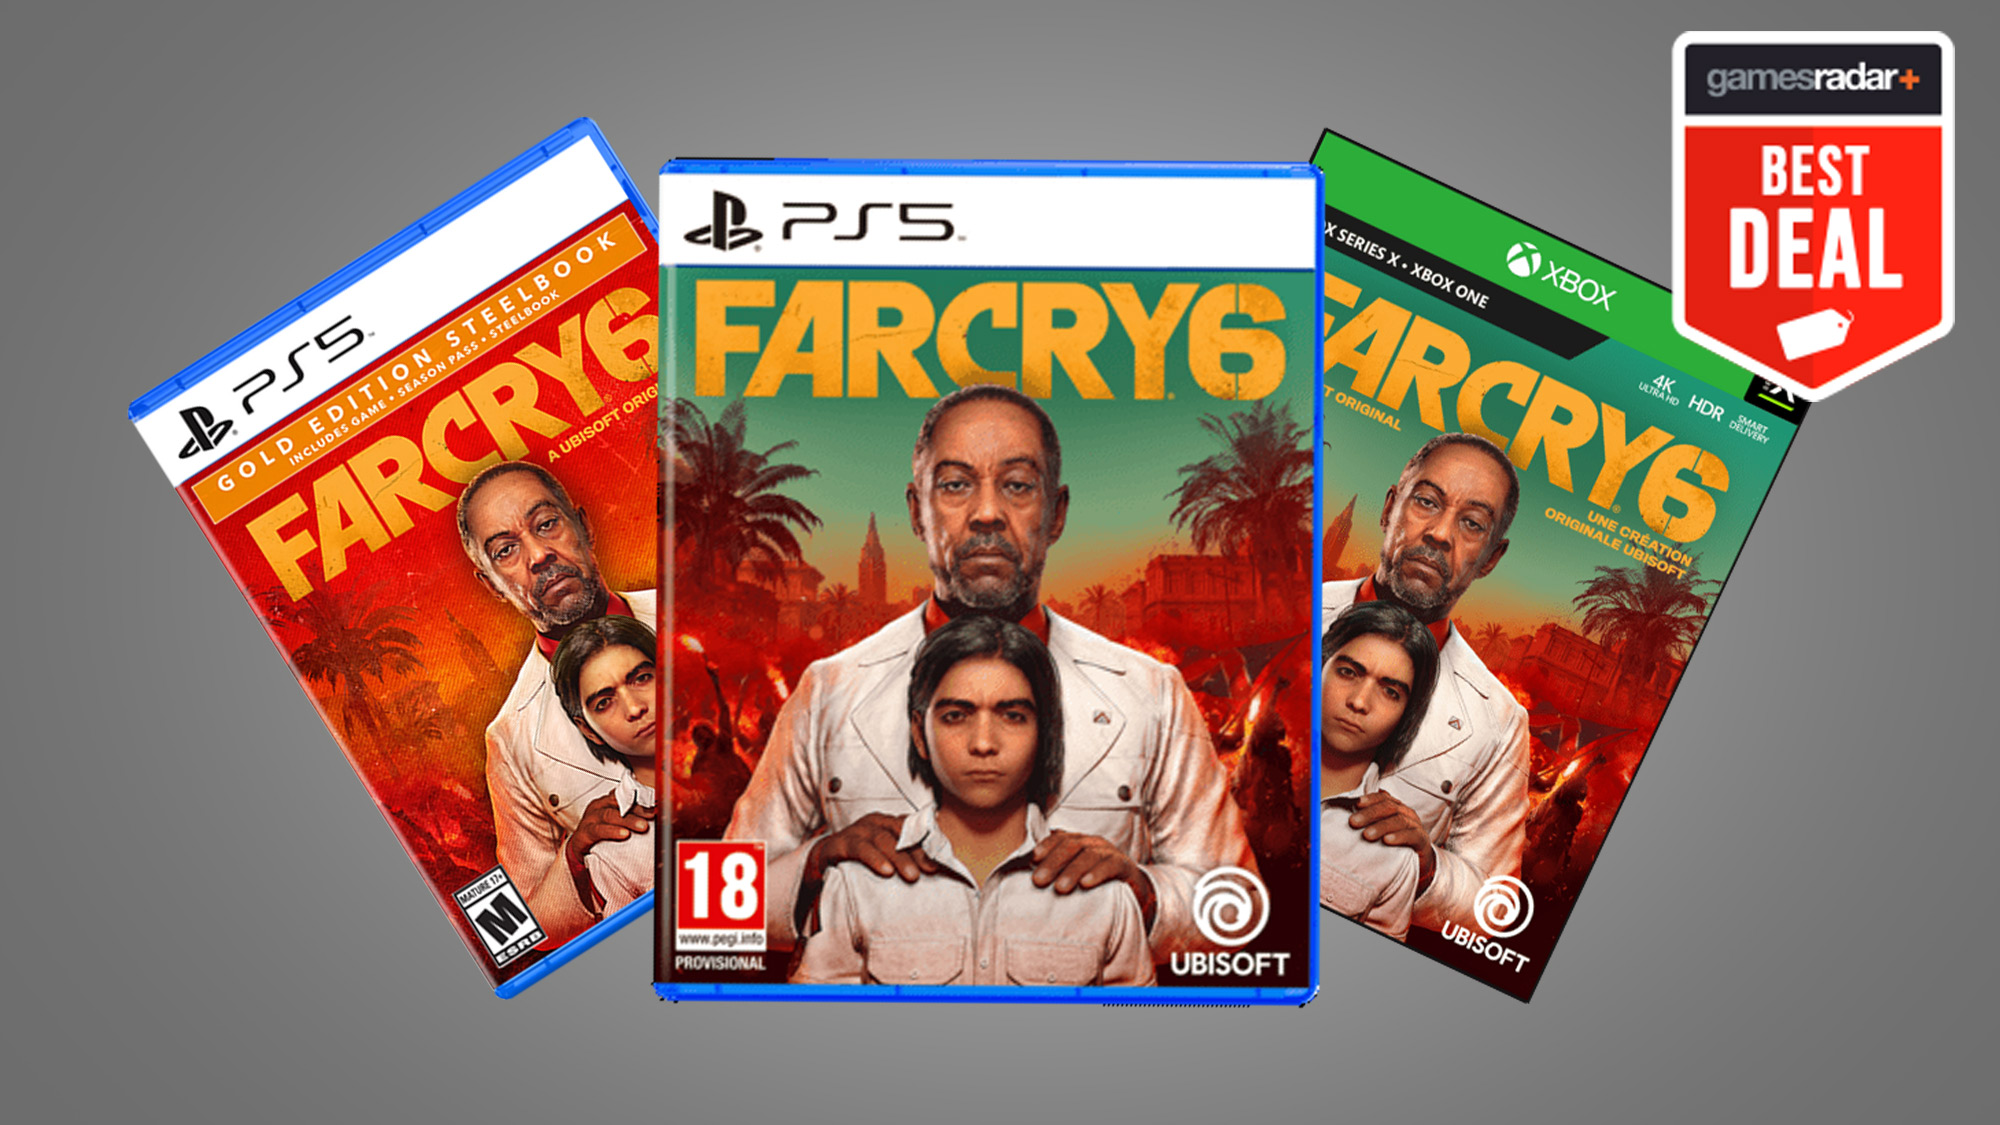 Far Cry fans will love these Xbox Game Pass free games